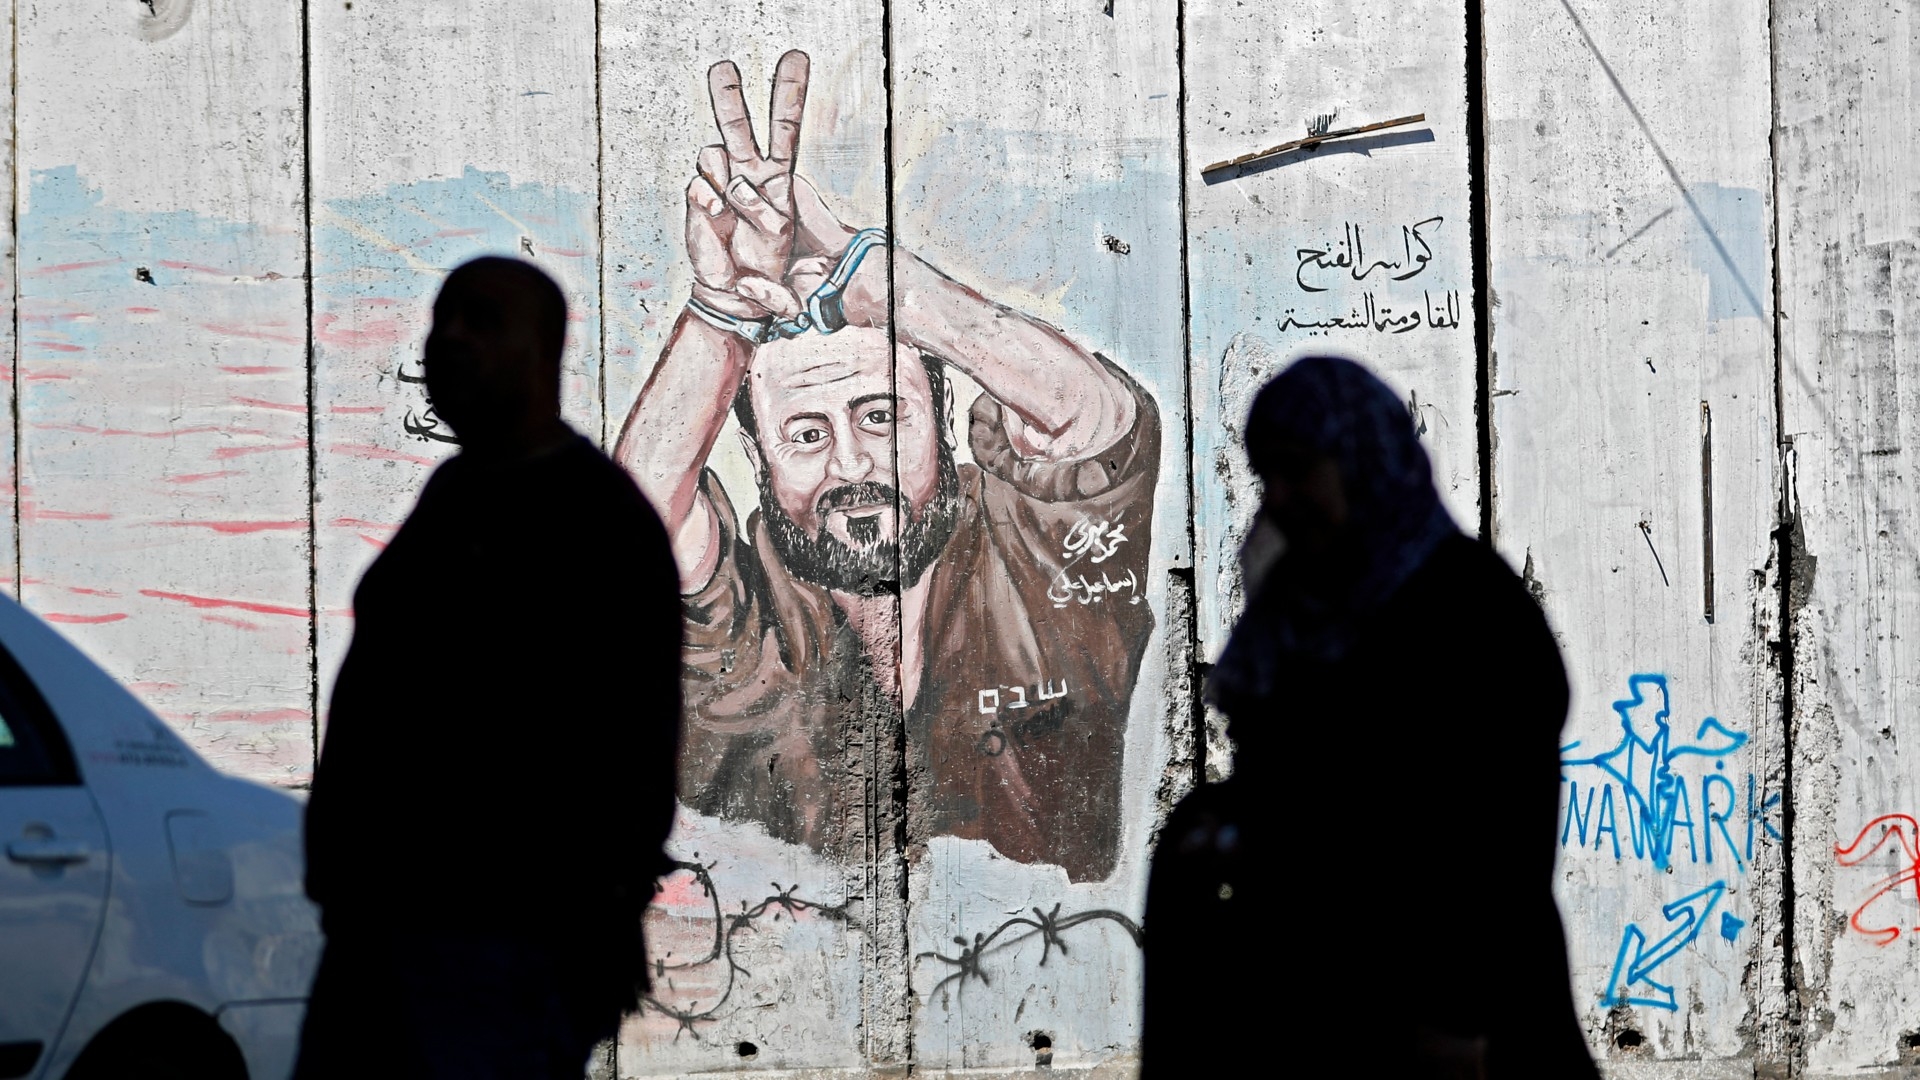 Palestinian Authority officials oppose release of Marwan Barghouti, source says